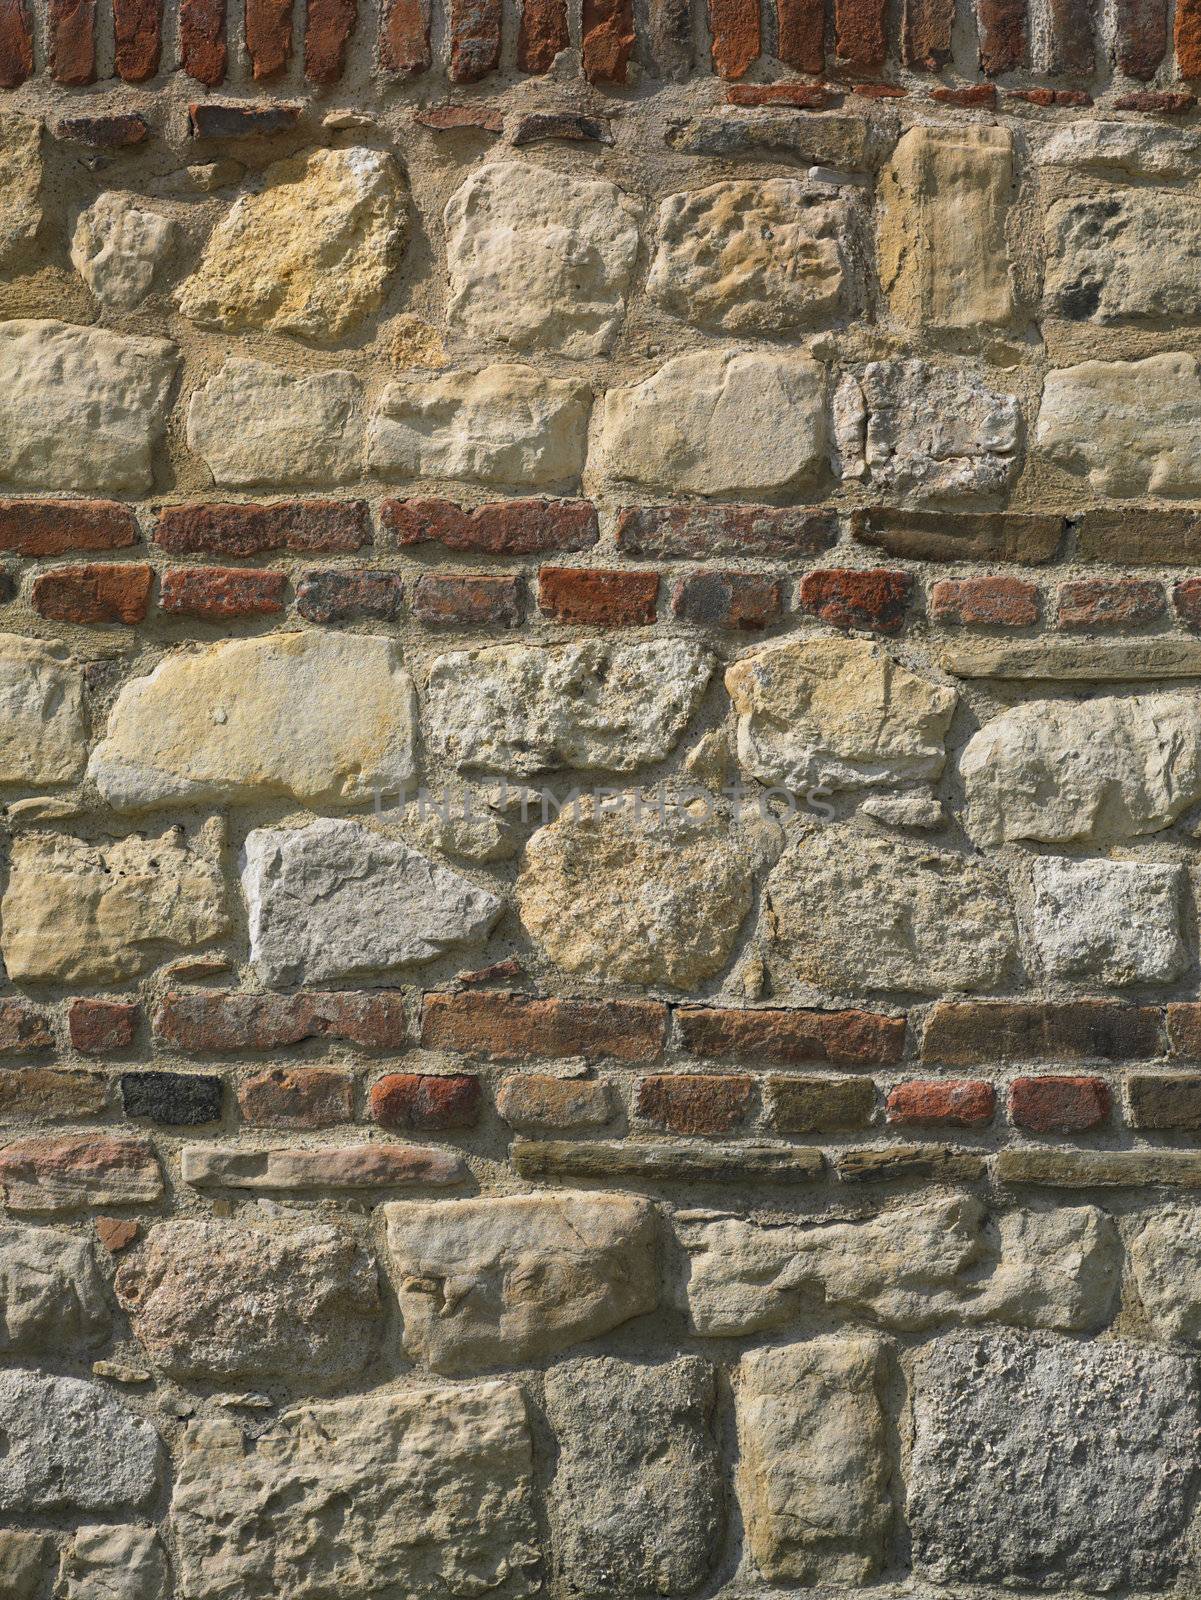 Rock and Brick Wall by adamr